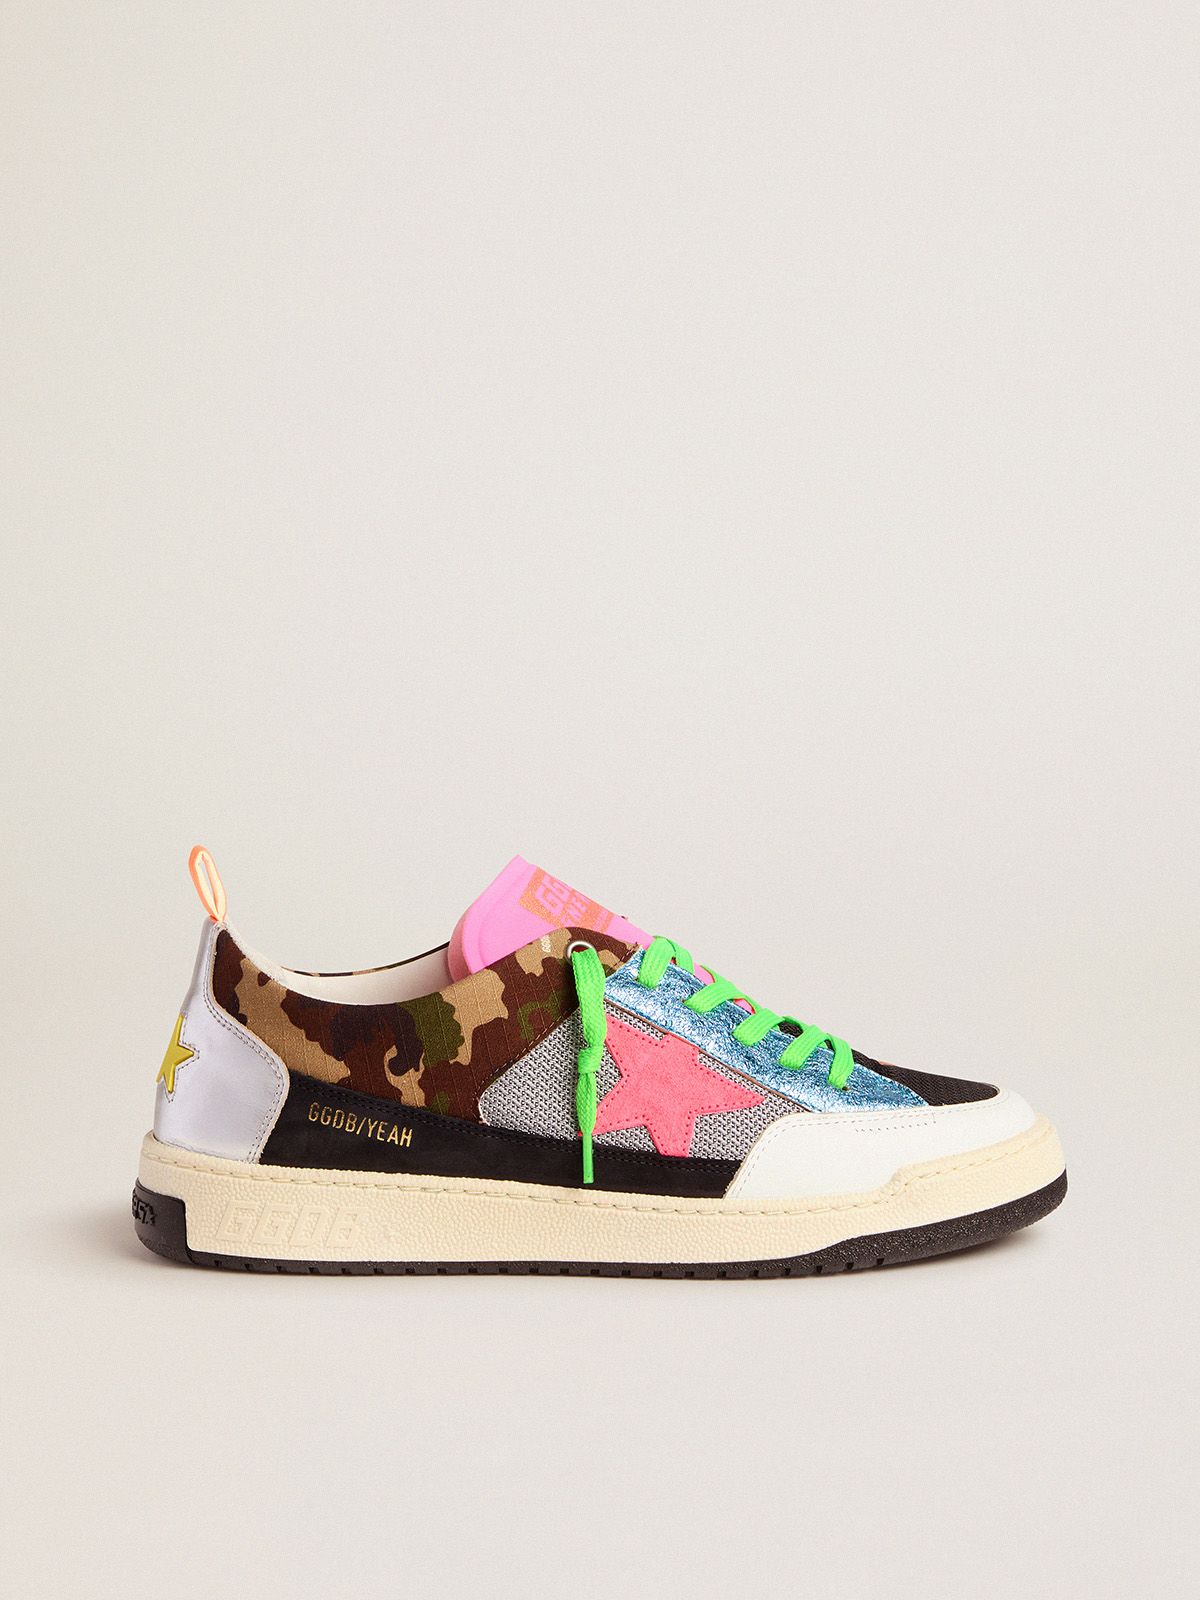 golden goose fuchsia Men’s star Yeah camouflage sneakers with